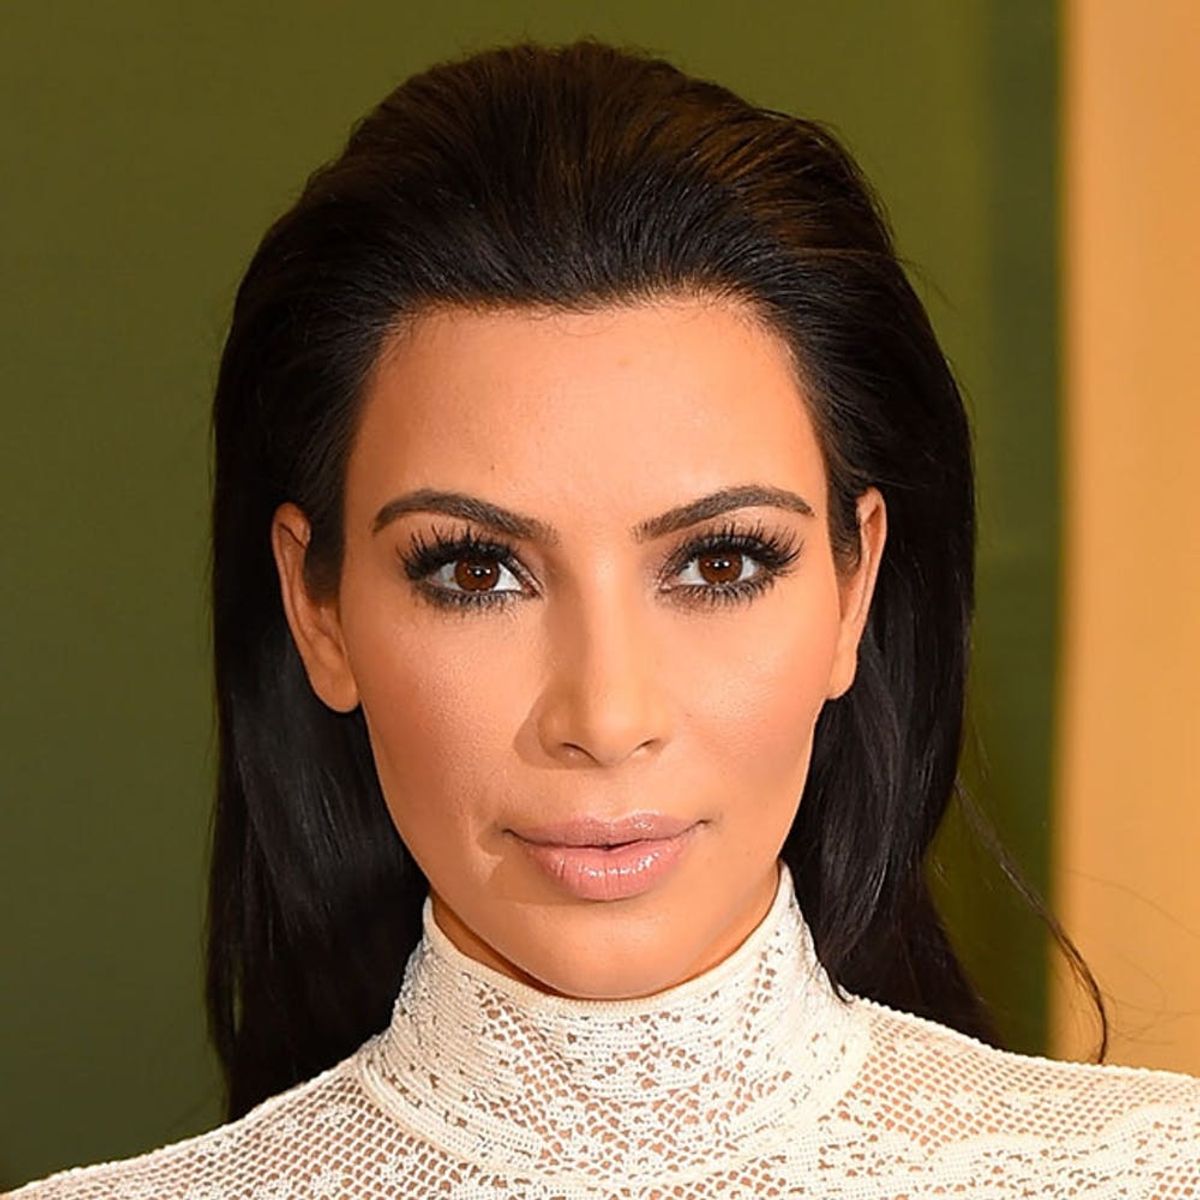 How to Copy Kim Kardashian’s $1,200 Makeup Routine With ALL Drugstore Products